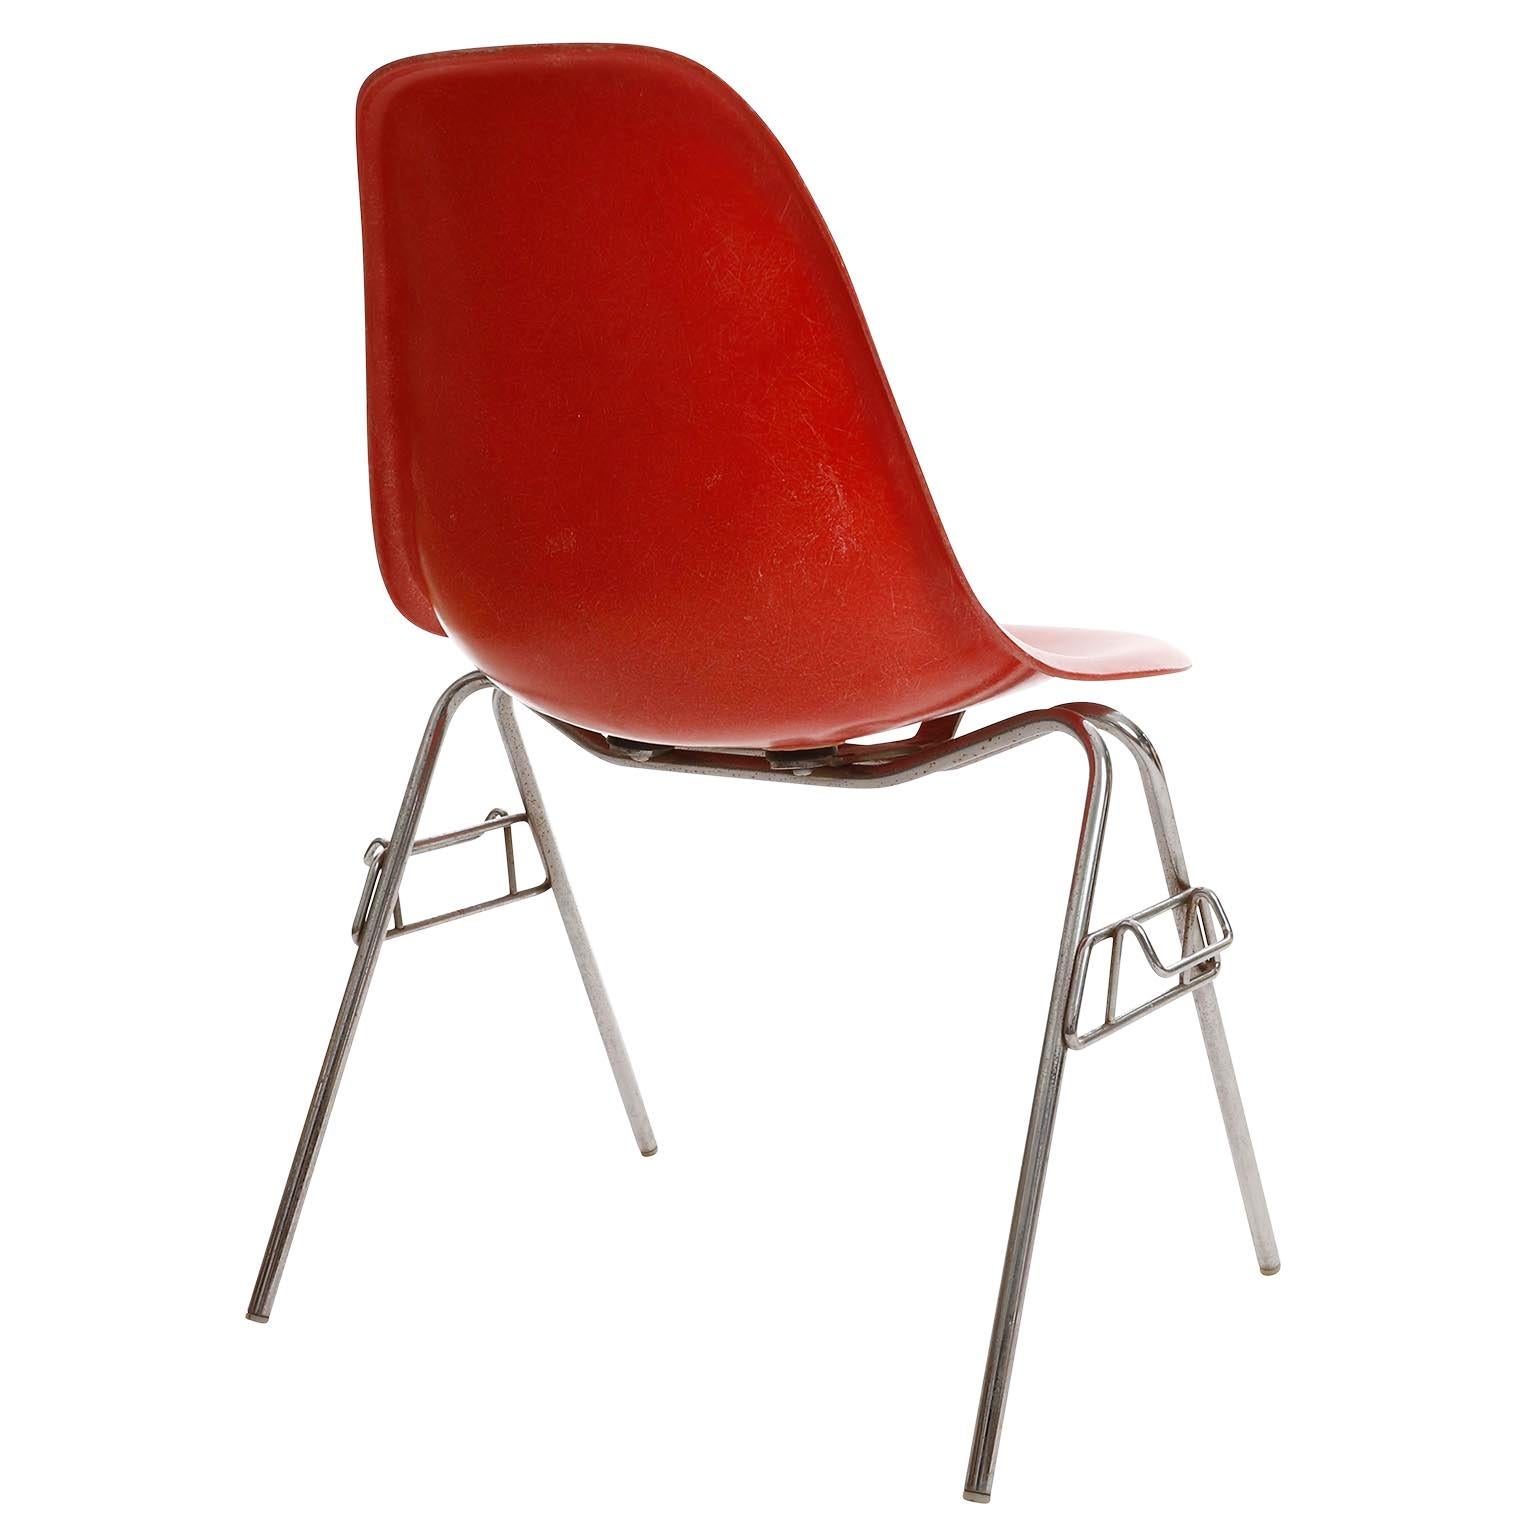 Late 20th Century Six Stacking Chairs, Charles & Ray Eames, Herman Miller, Red Fiberglass, 1974. For Sale